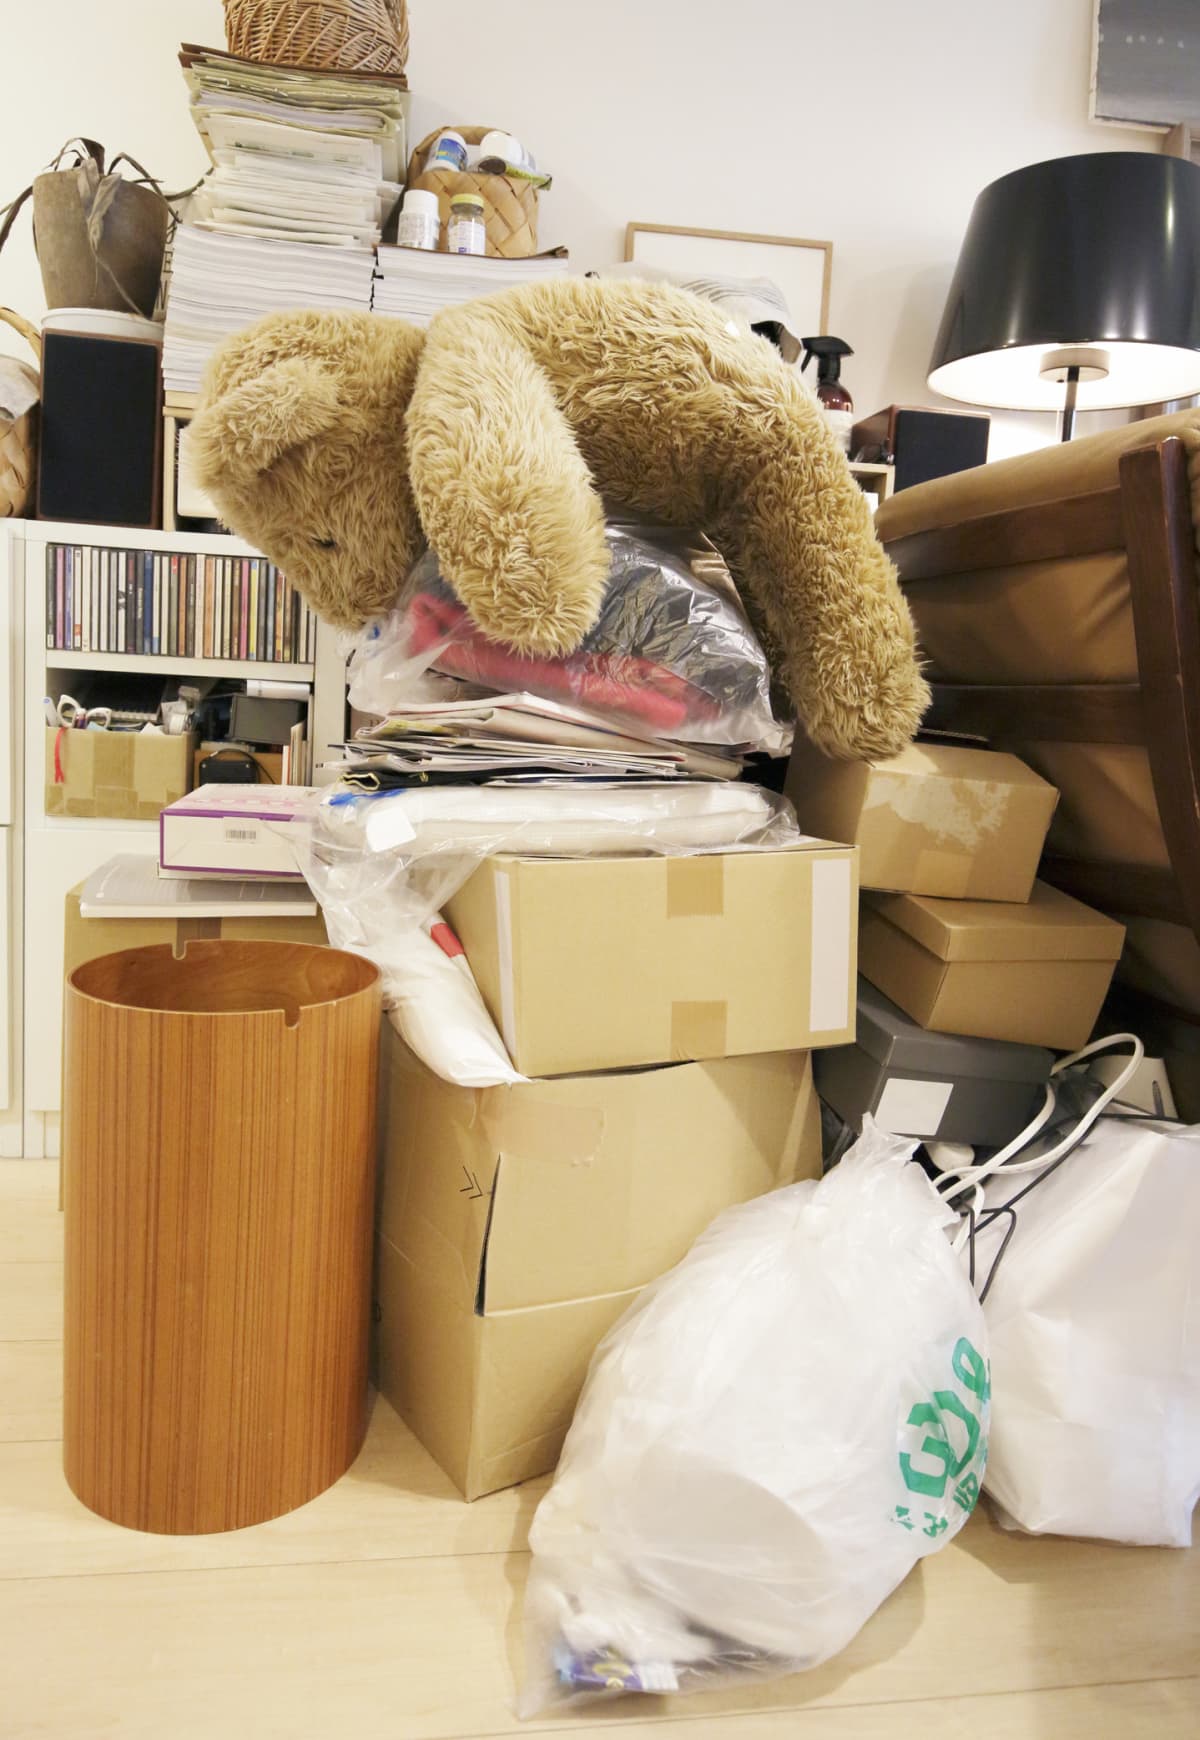 Cluttered room with teddy bear